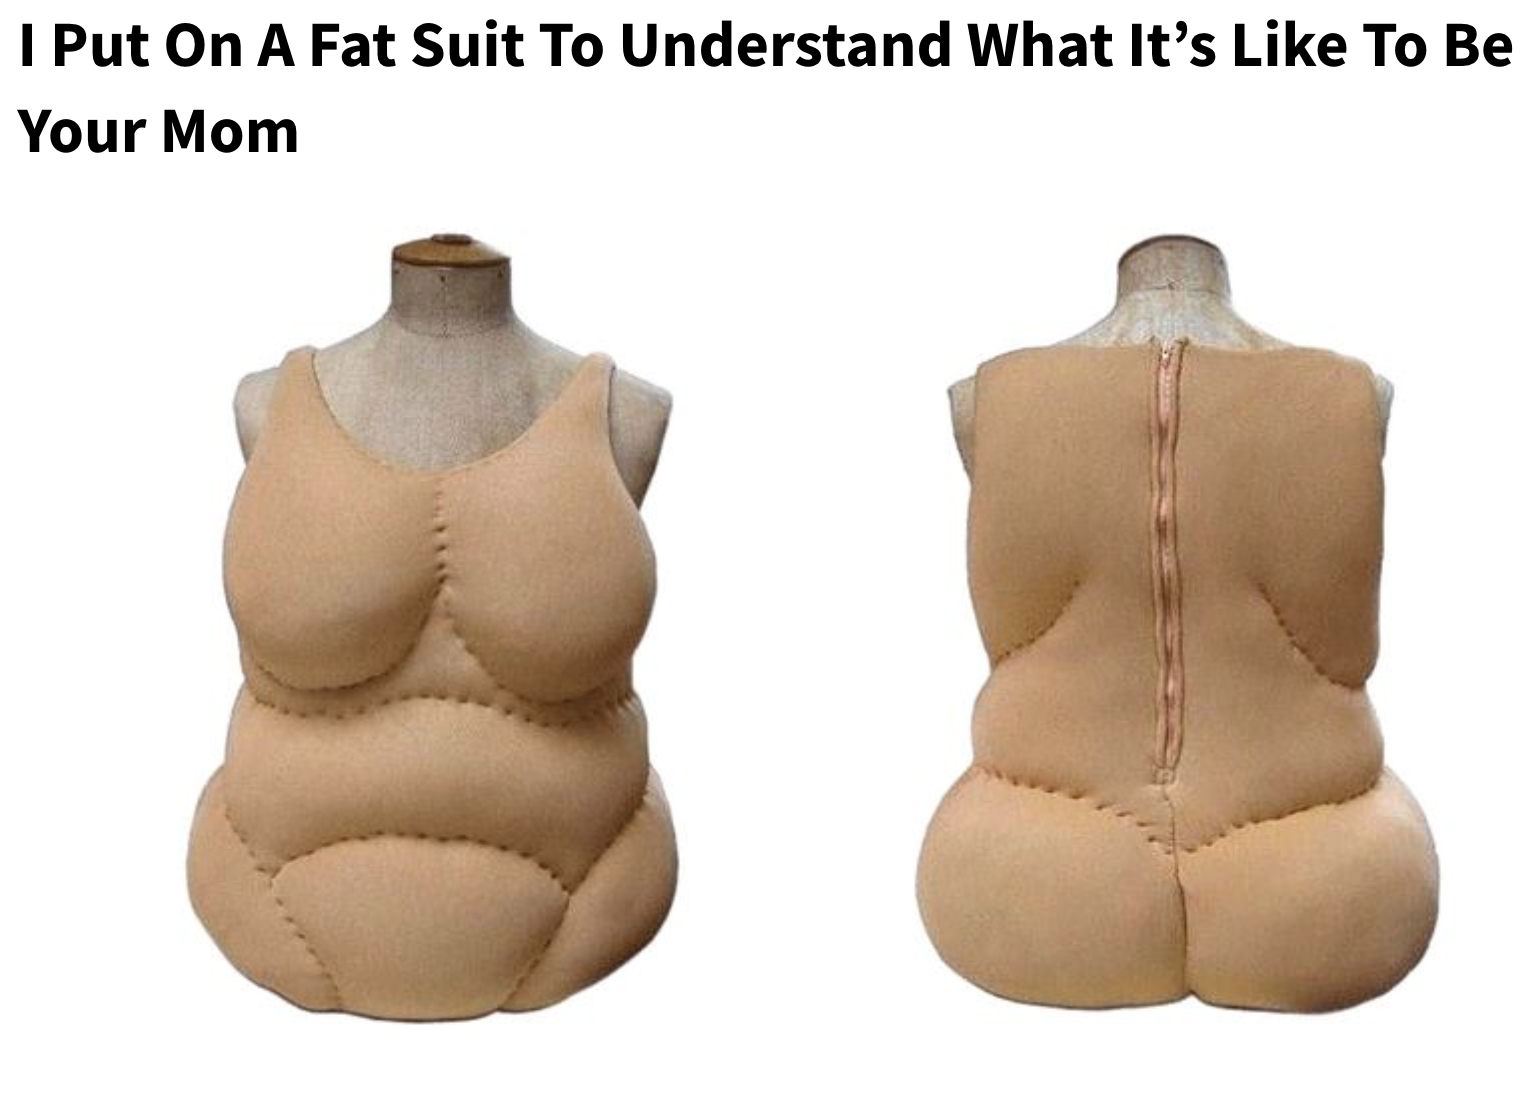 clickhole headlines - I Put On A Fat Suit To Understand what It's To Be Your Mom